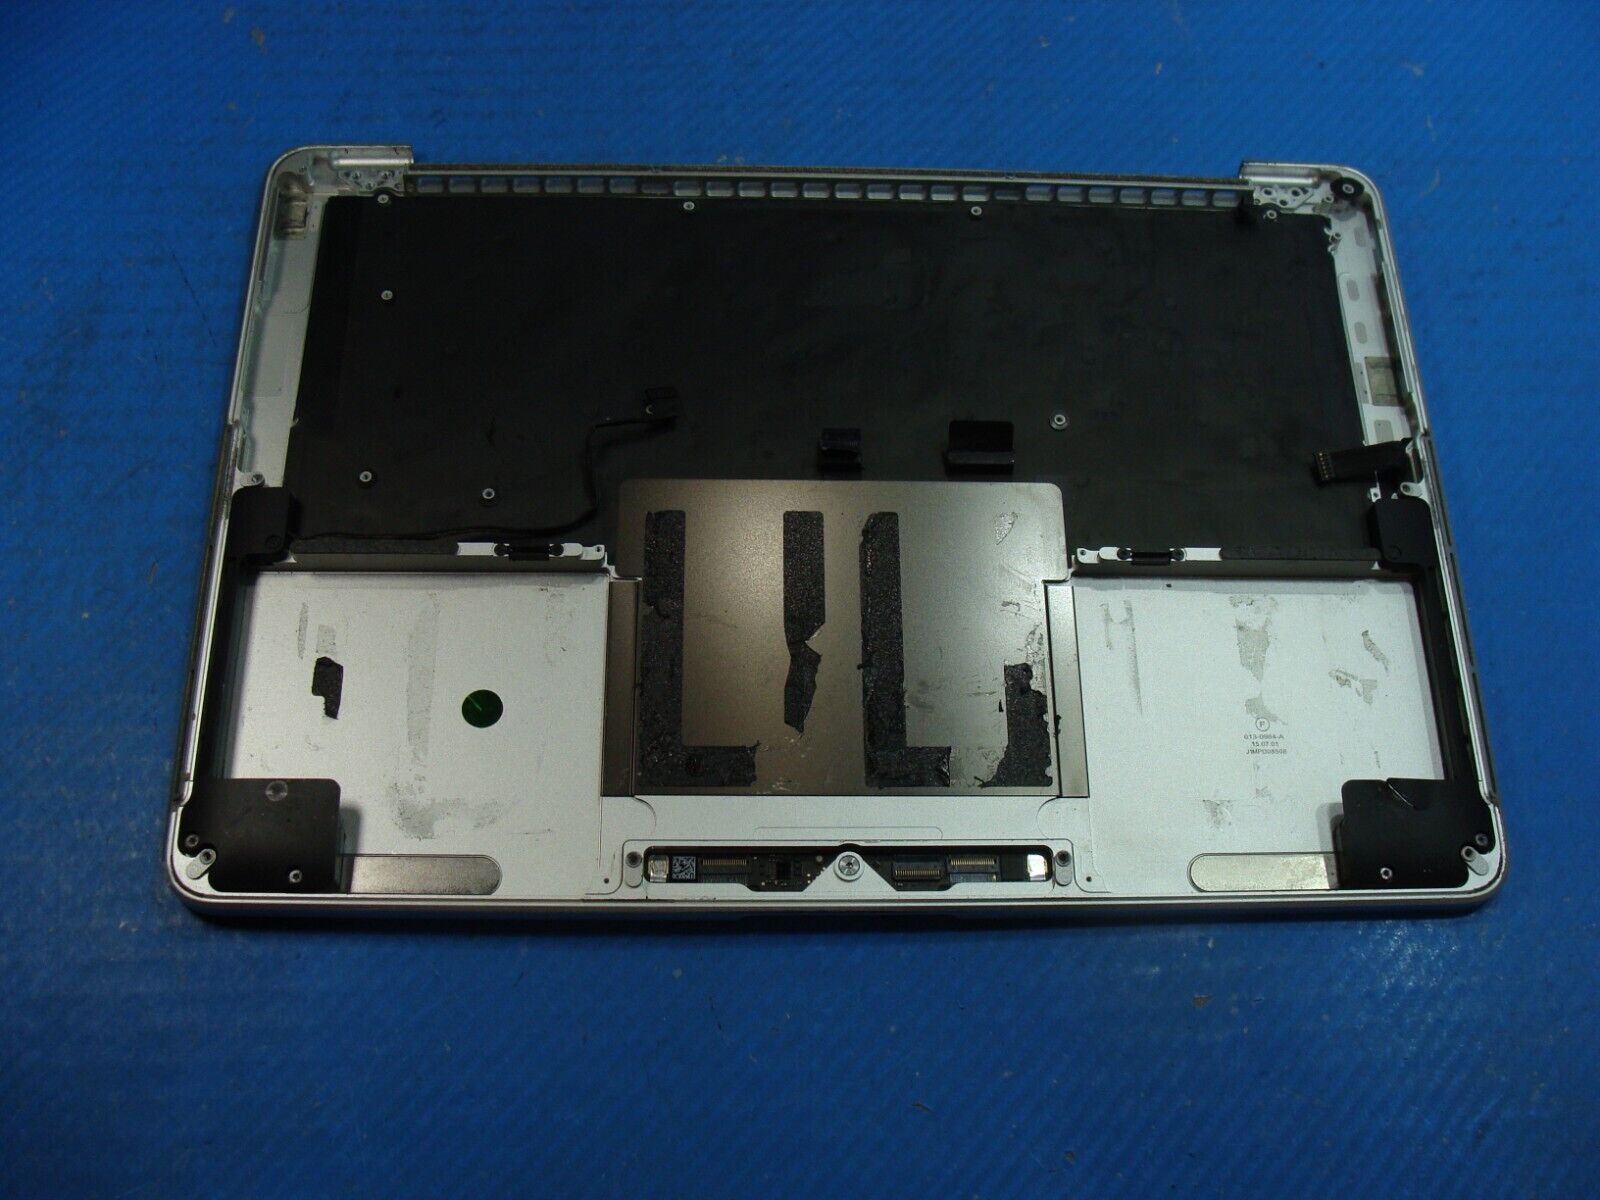 MacBook Pro 13 A1502 Late 2013 ME866LL Top Case w/TrackPad NO Battery 661-8154